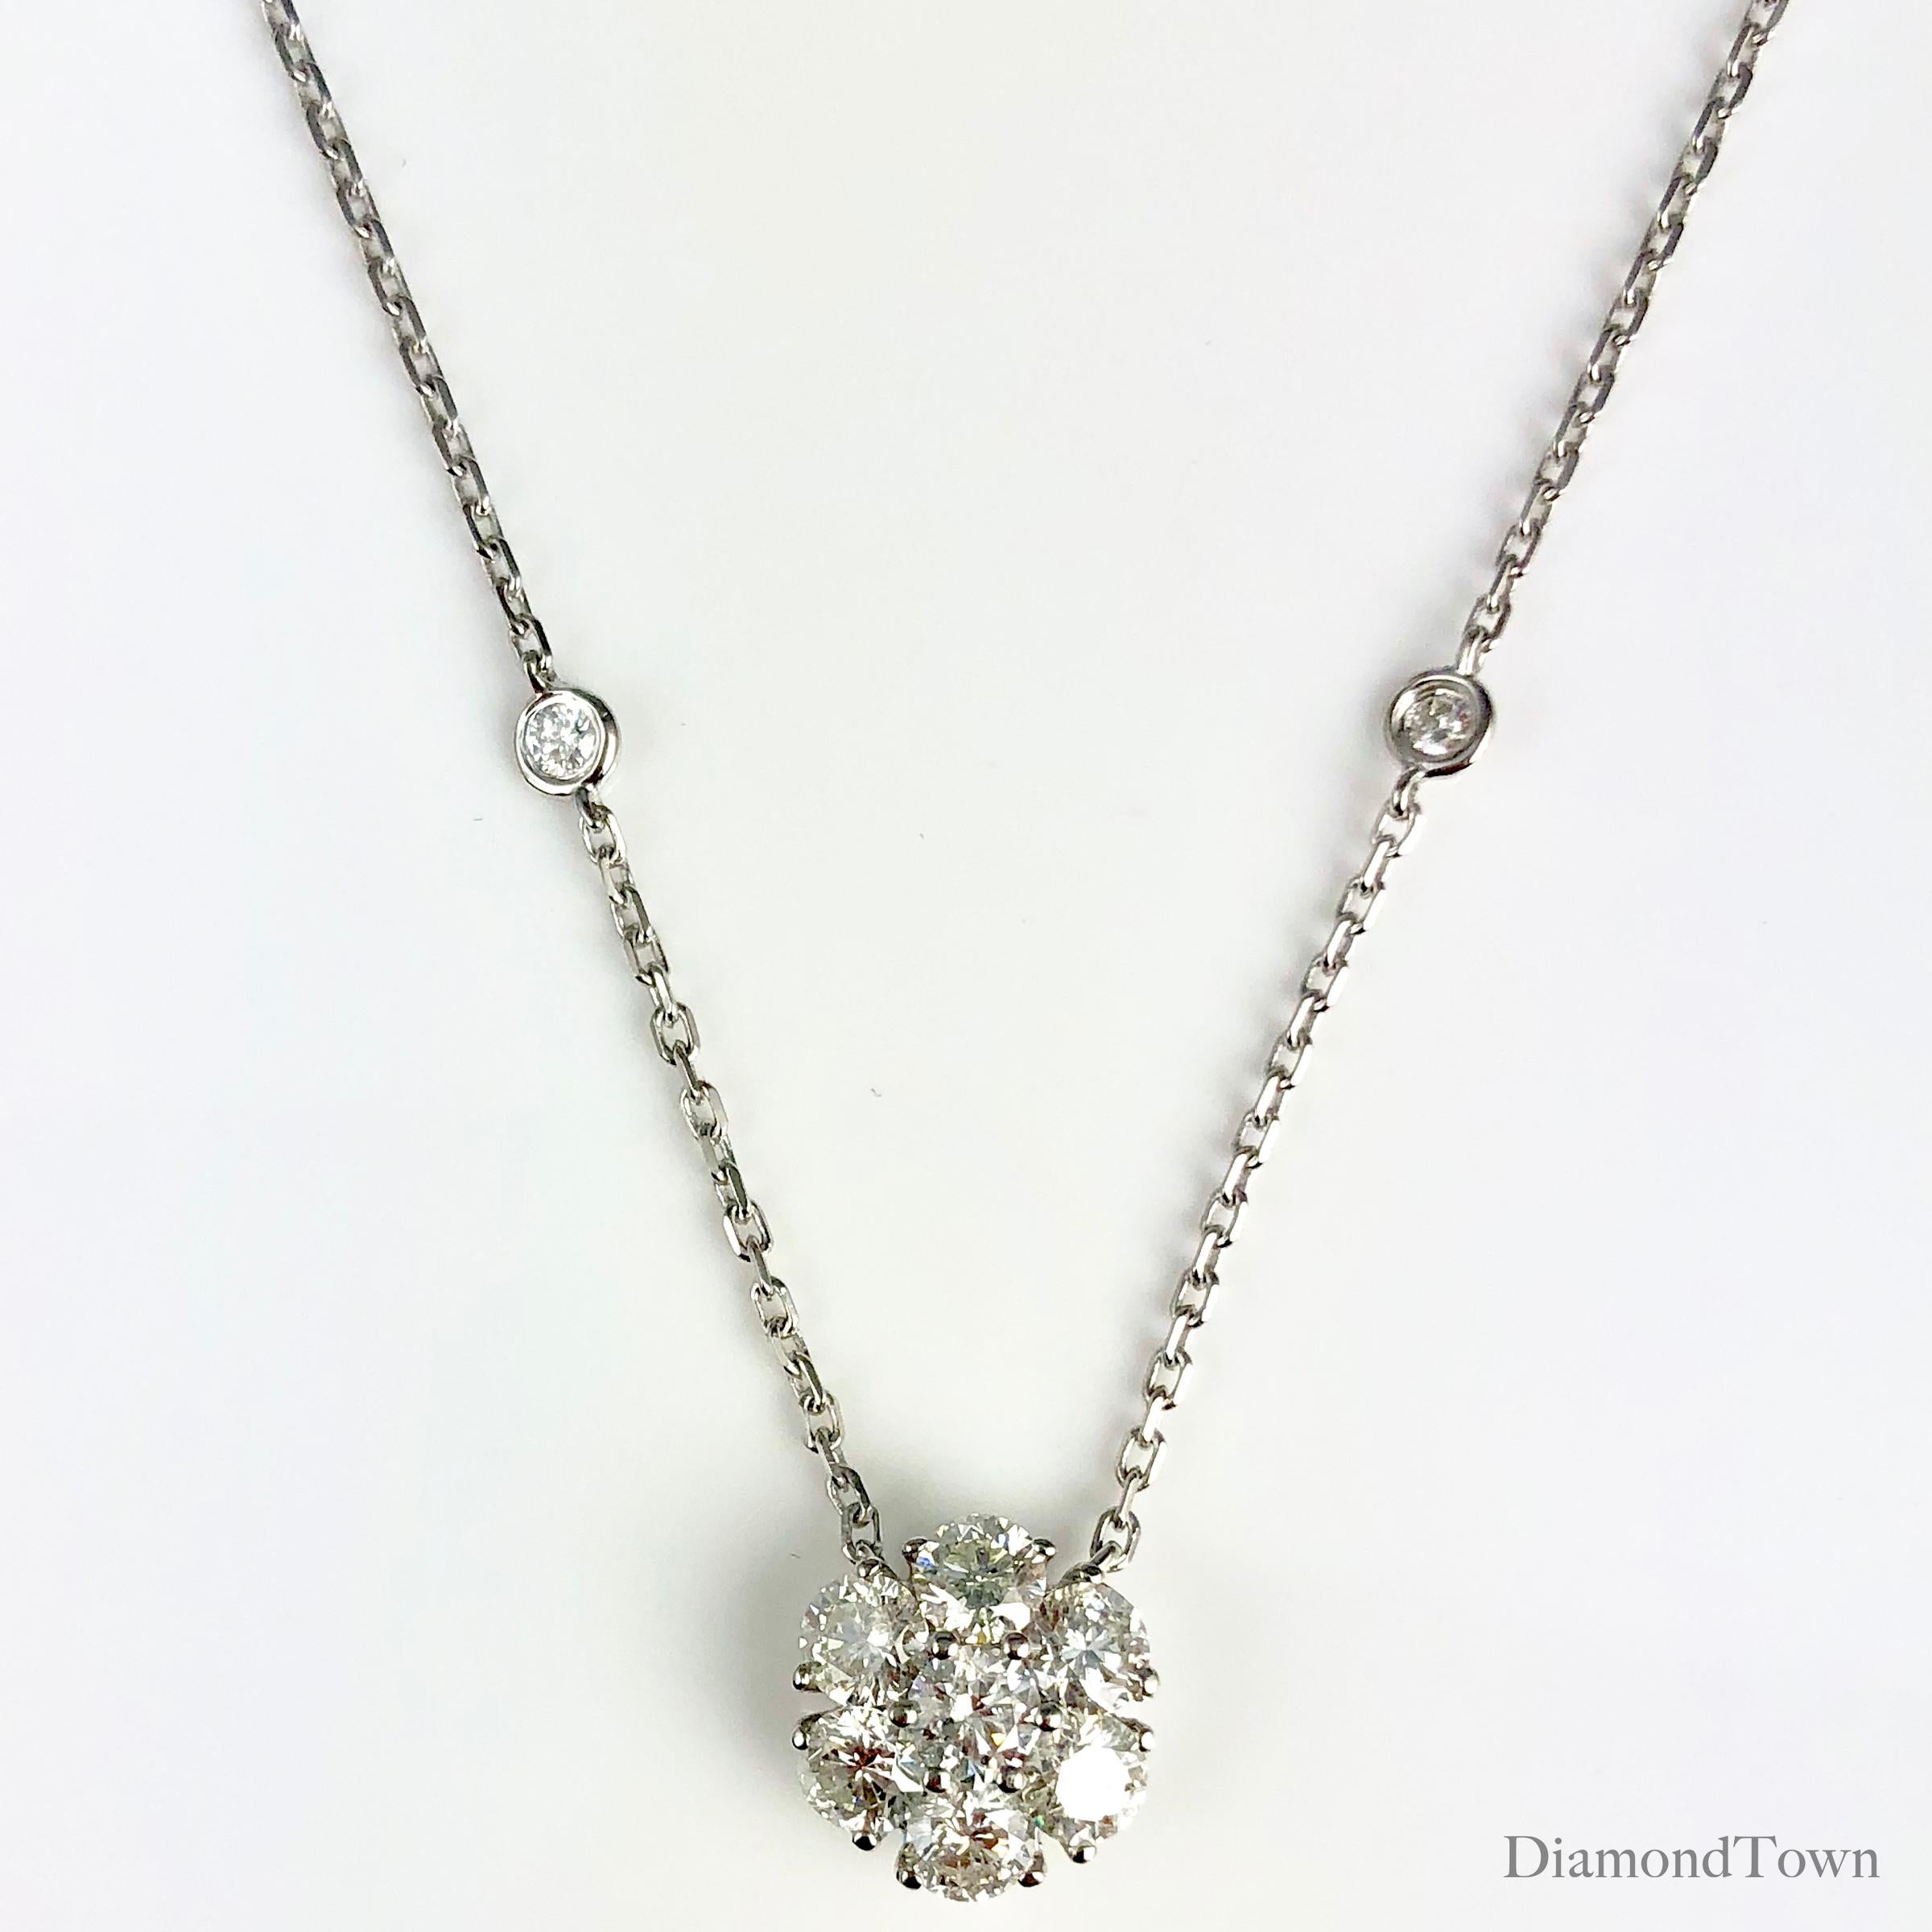 (DiamondTown) This lovely pendant features seven round diamonds arranged in a flower shape (diamond weight 1.33 carats). Eight additional diamonds placed along the chain bring the total diamond weight to 1.61 carats.

Chain measures 17